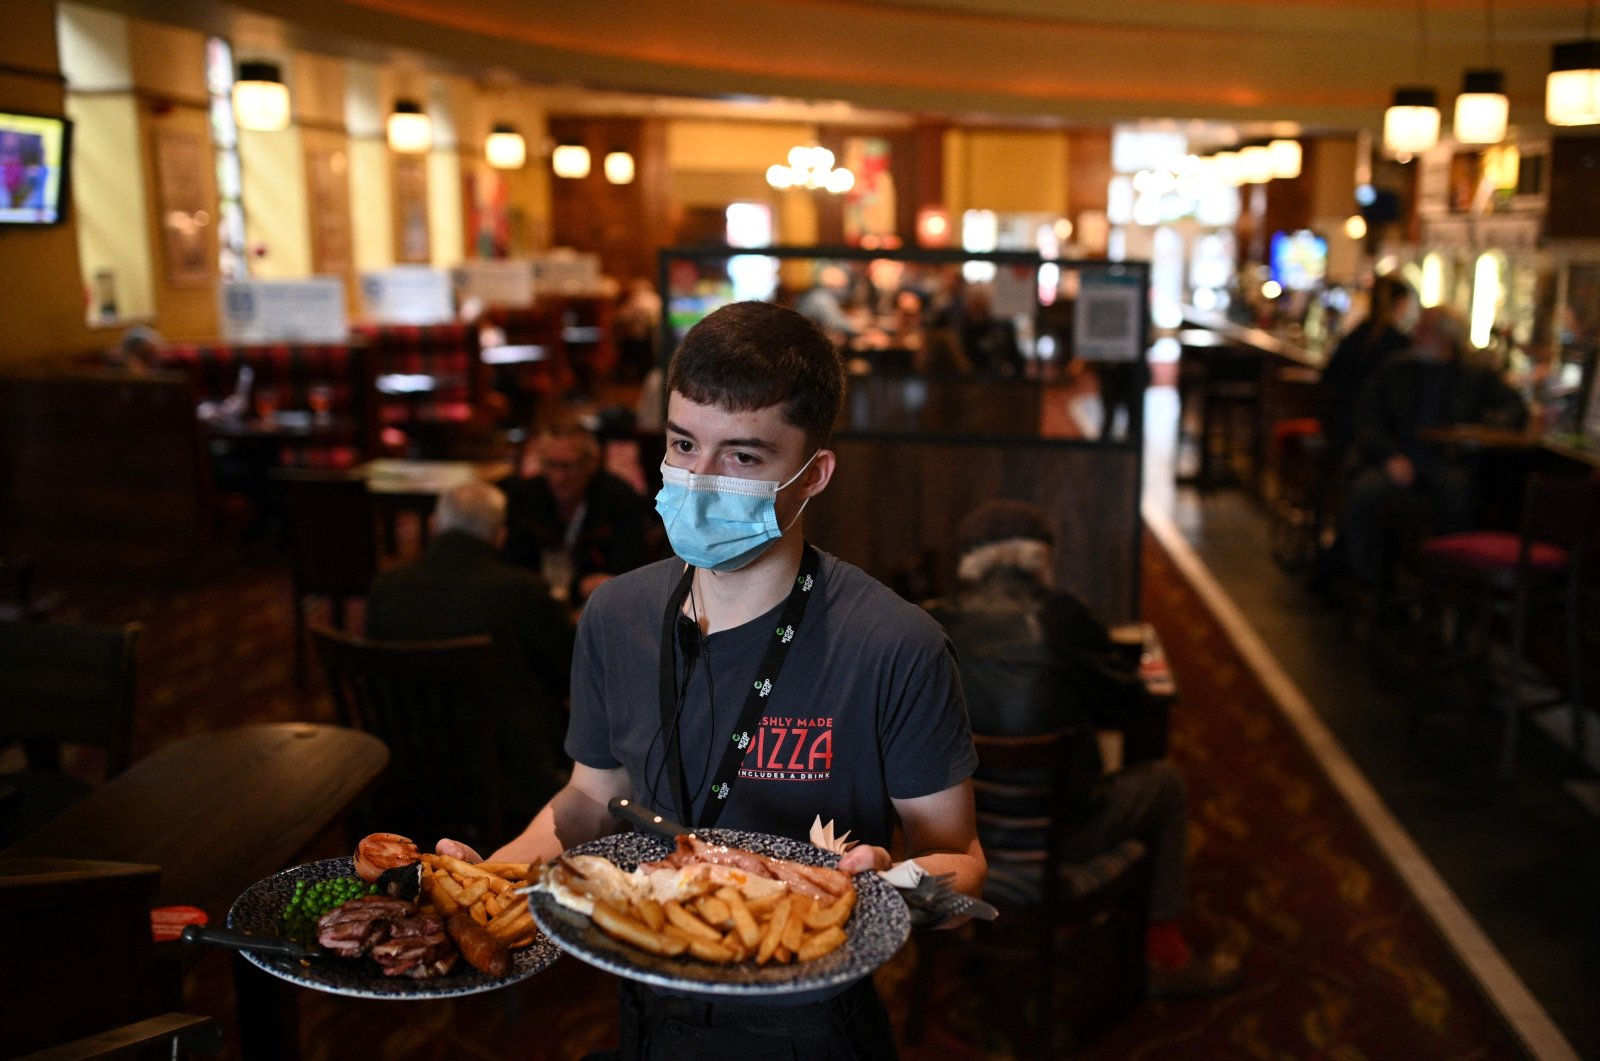 A member of the bar staff serves food in a Wetherspoons pub in Leigh, Greater Manchester, northwest England, Oct. 22, 2020. (AFP Photo)